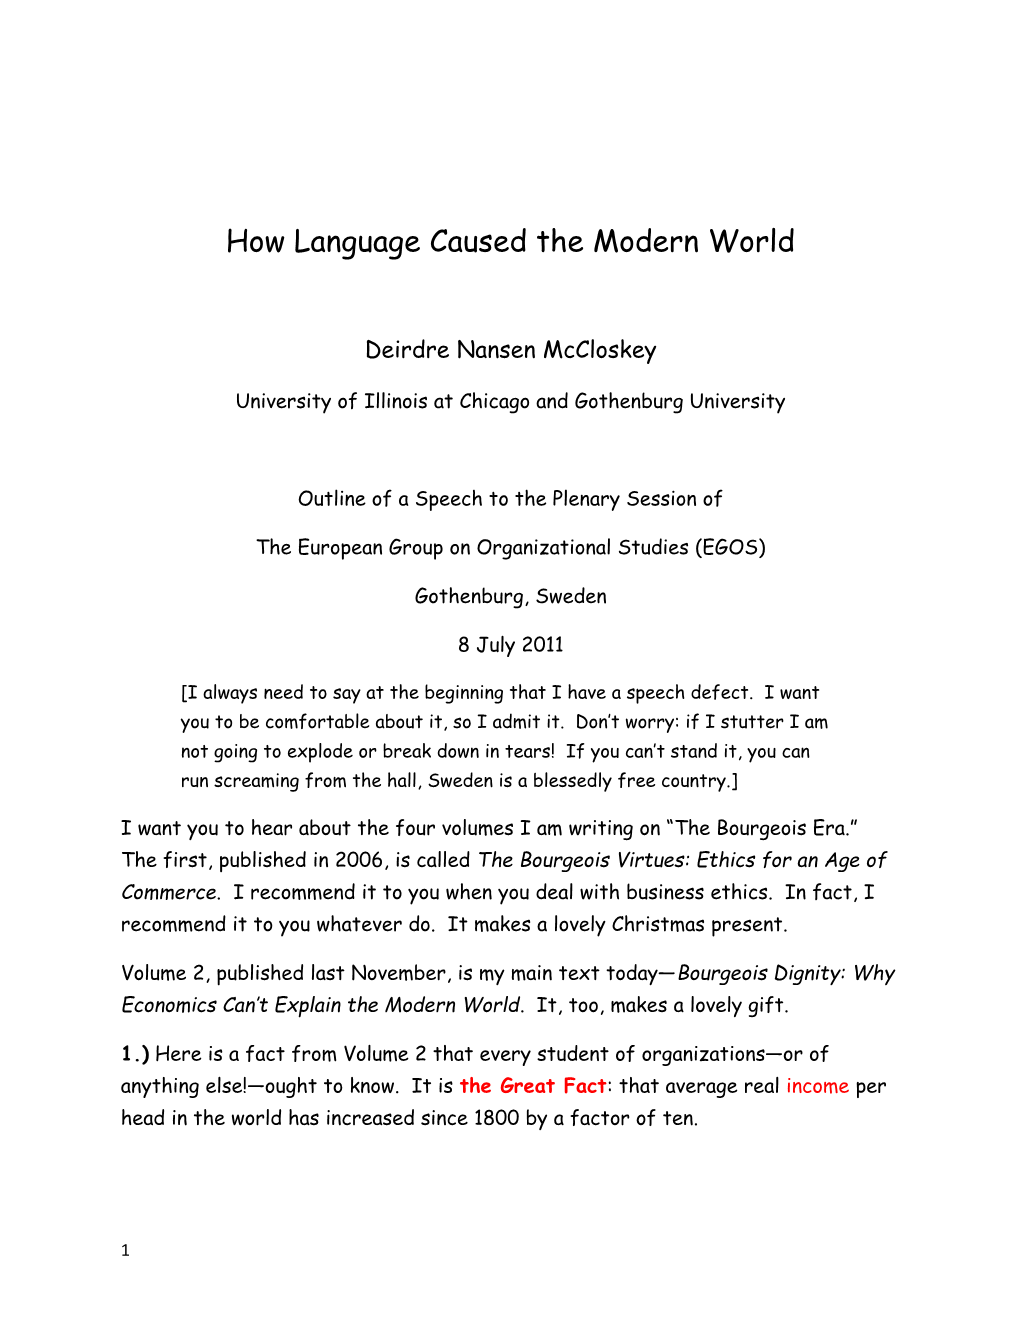 How Language Caused the Modern World